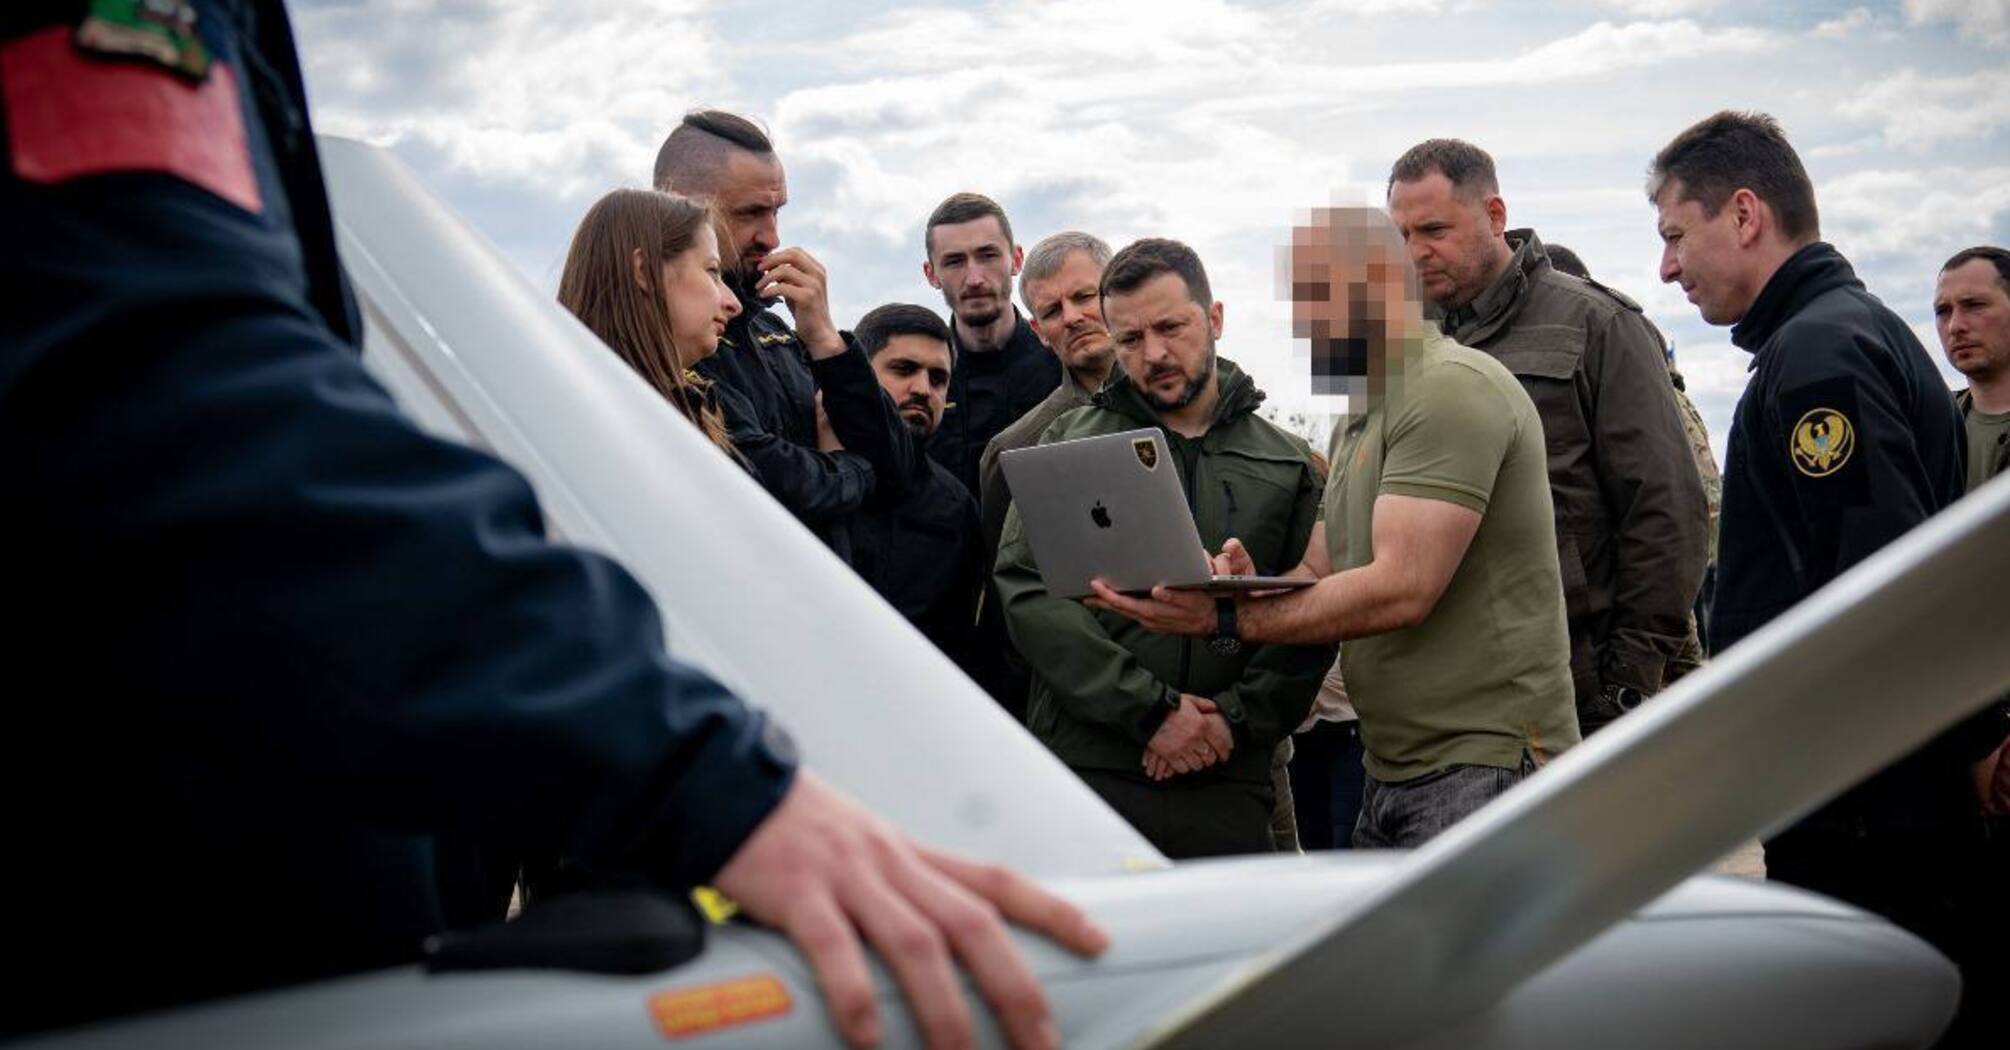 The Ukrainian analogue of the Lancet was shown to Zelensky: the unique characteristics of the UAV became known